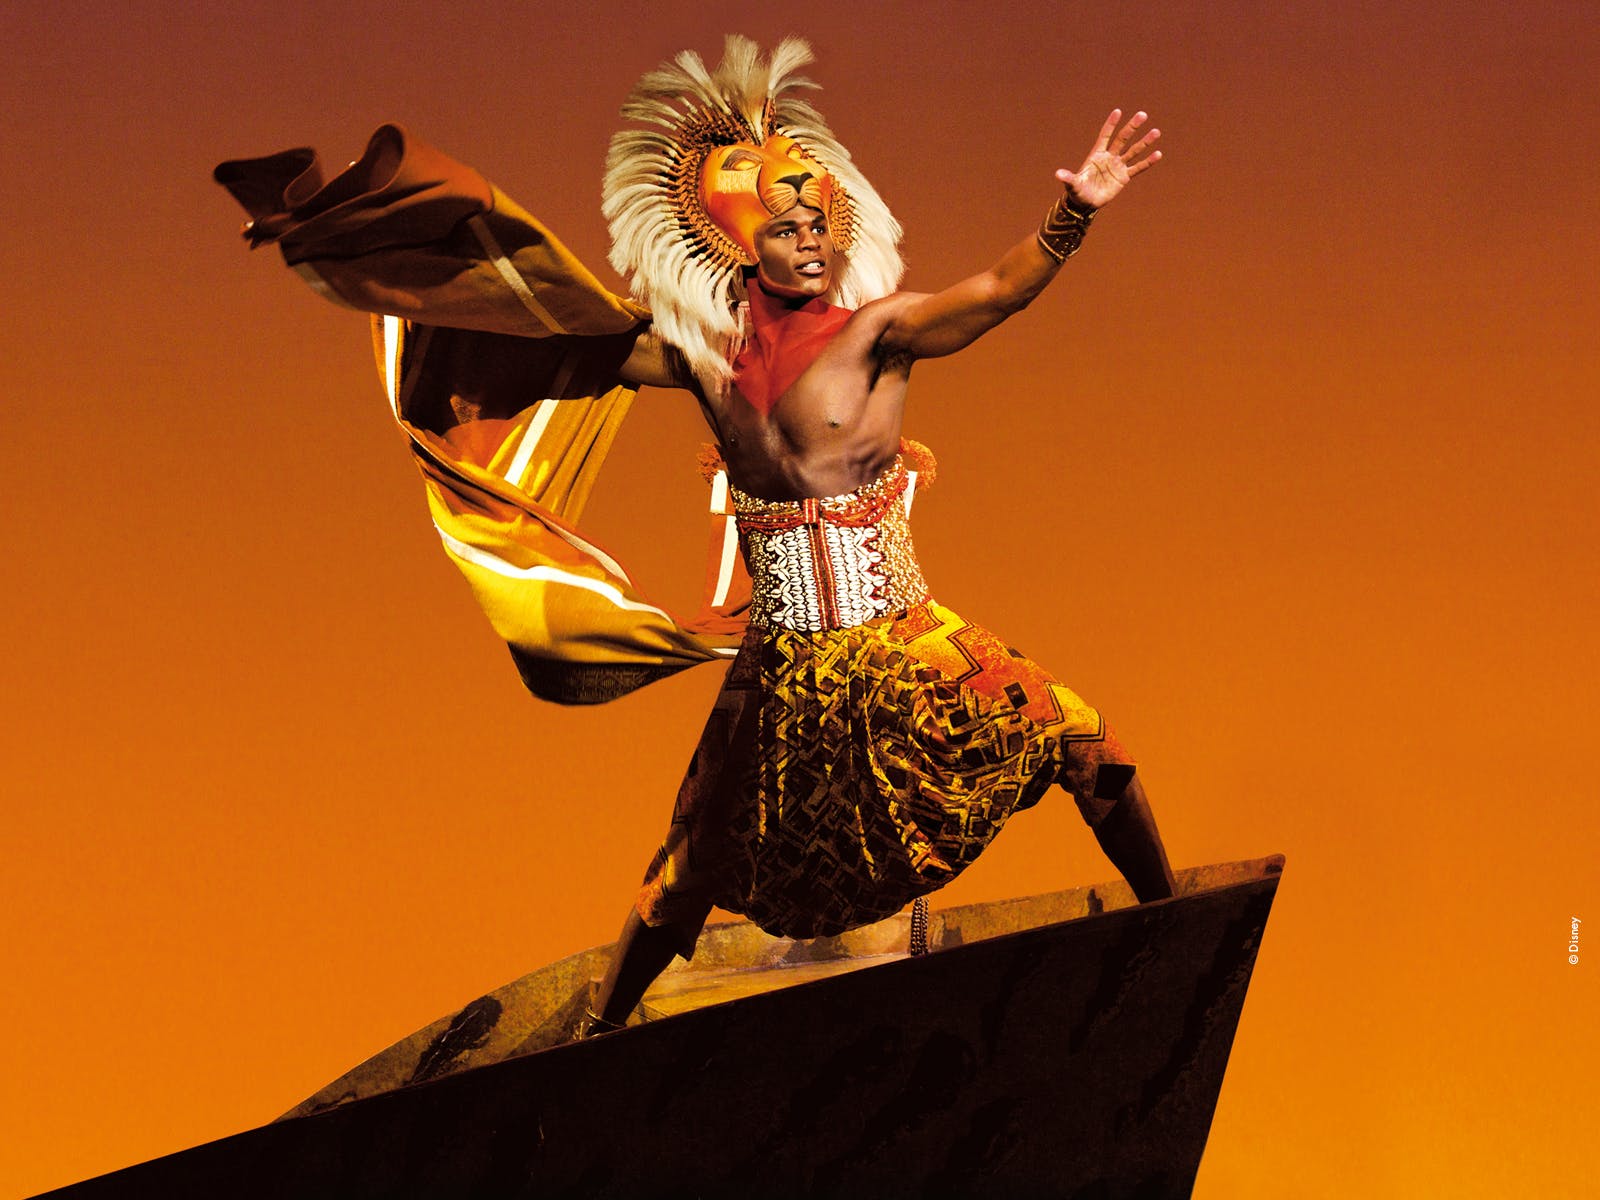 The Lion King photo from the show